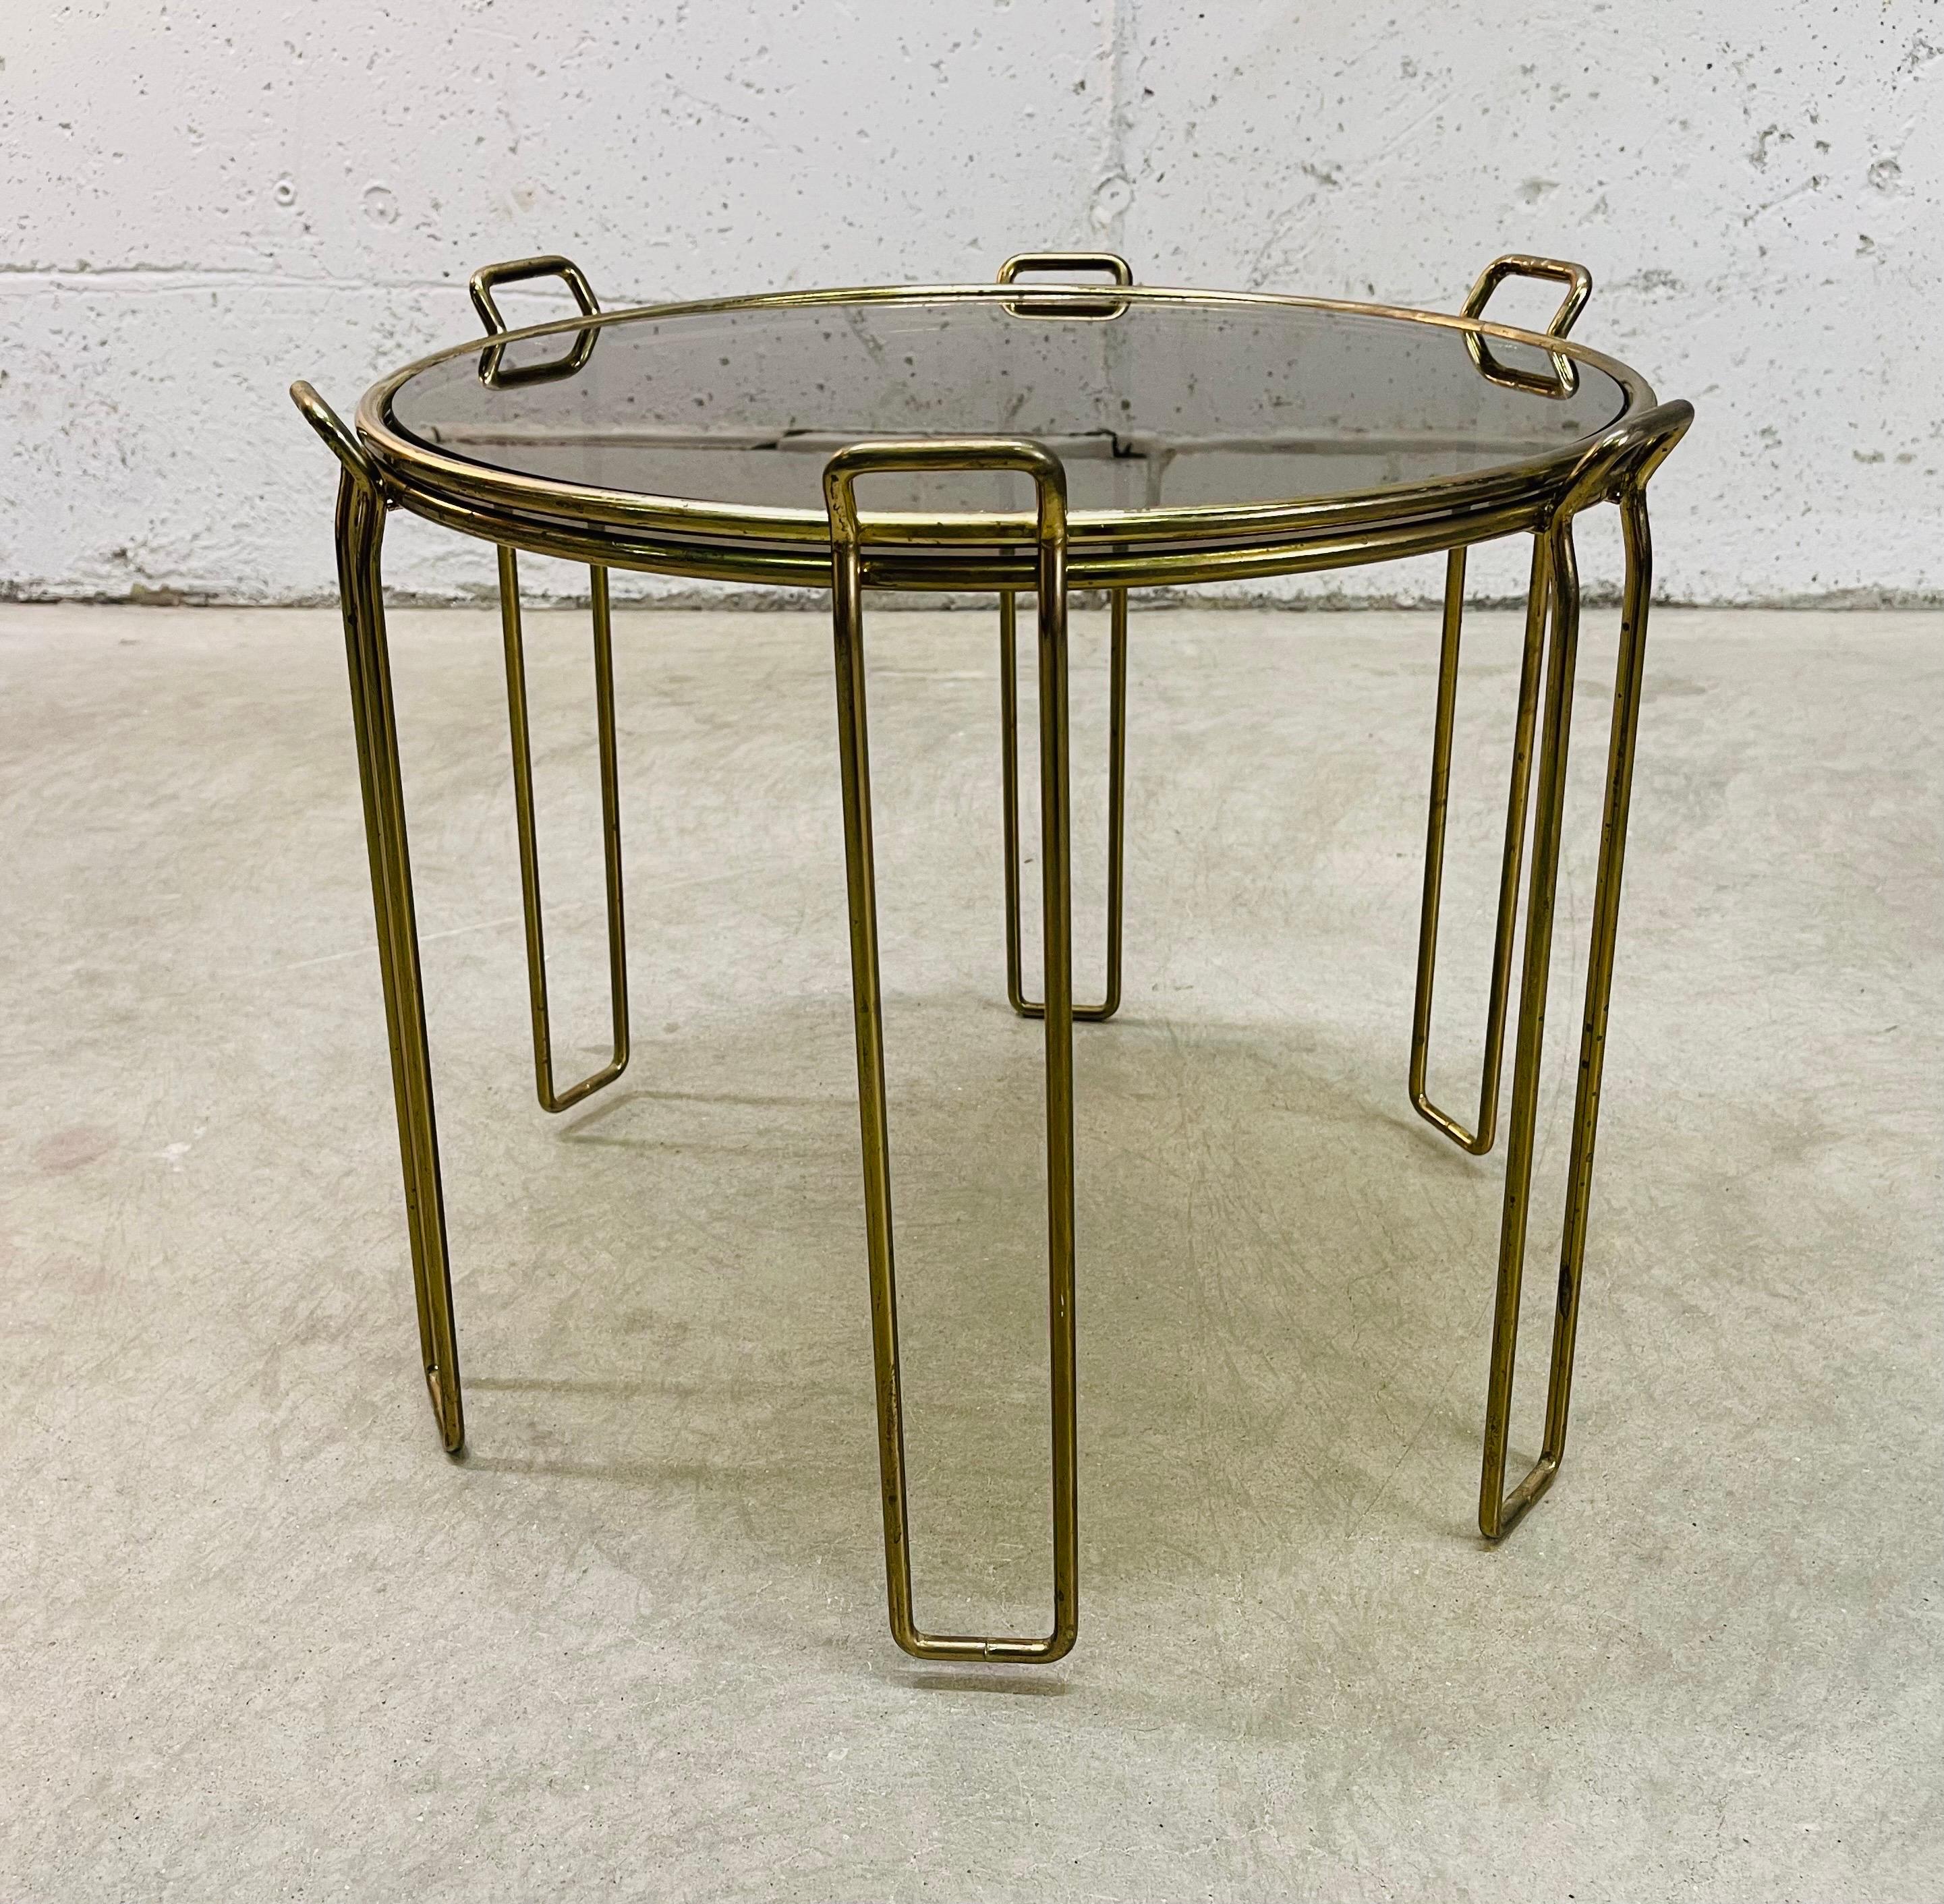 Vintage 1970s pair of round gold metal and smoked glass stacking side tables. Stack for easy storage. Both have light wear from use. Glass is in very good condition. No marks.